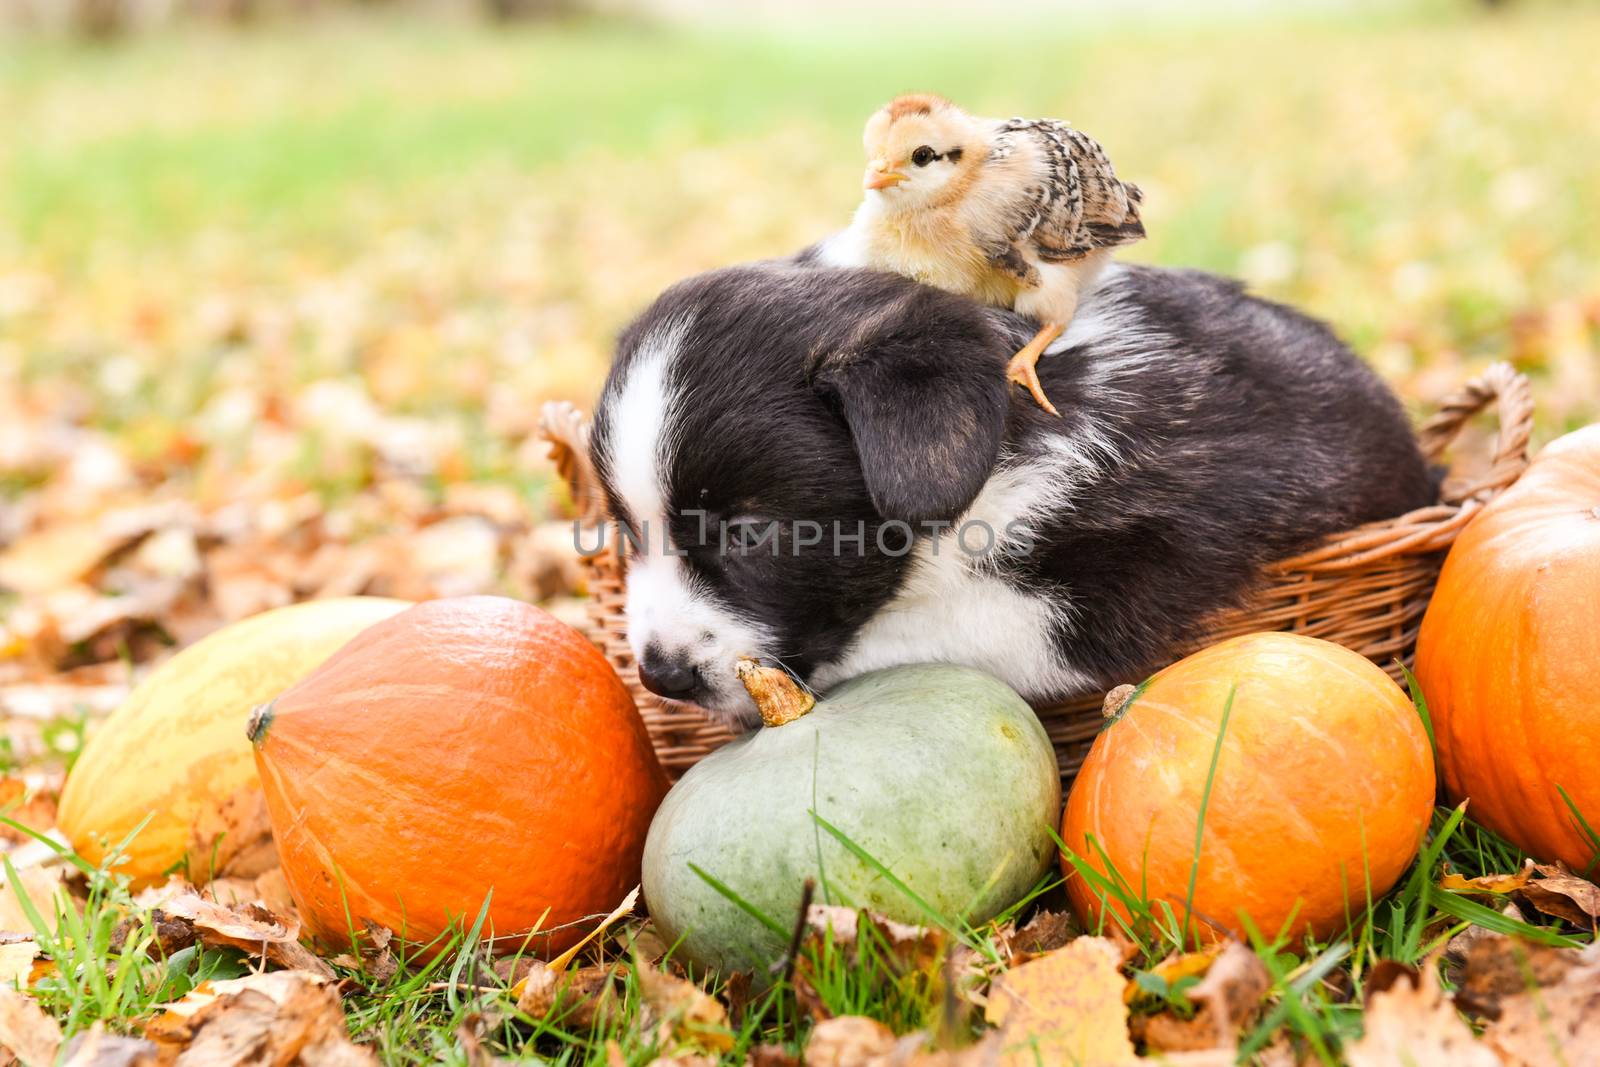 Corgi puppy dog with chicken and pumpkin in basket by infinityyy